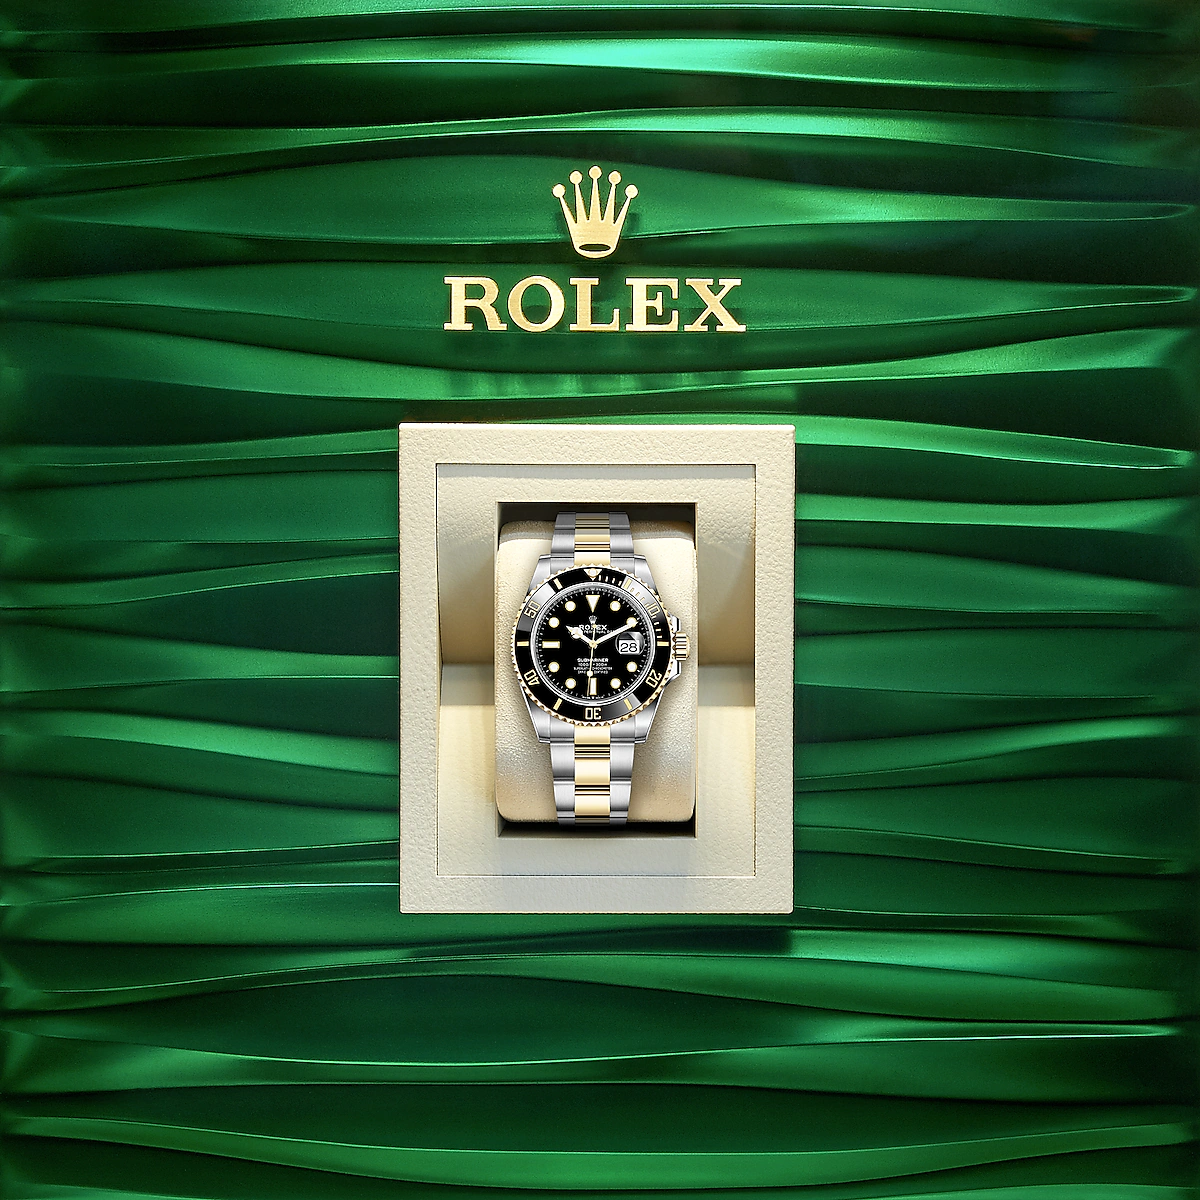 Rolex Submariner Date, Stainless Steel and 18k Yellow Gold, 41mm, Ref# 126613ln-0002, Watch in box